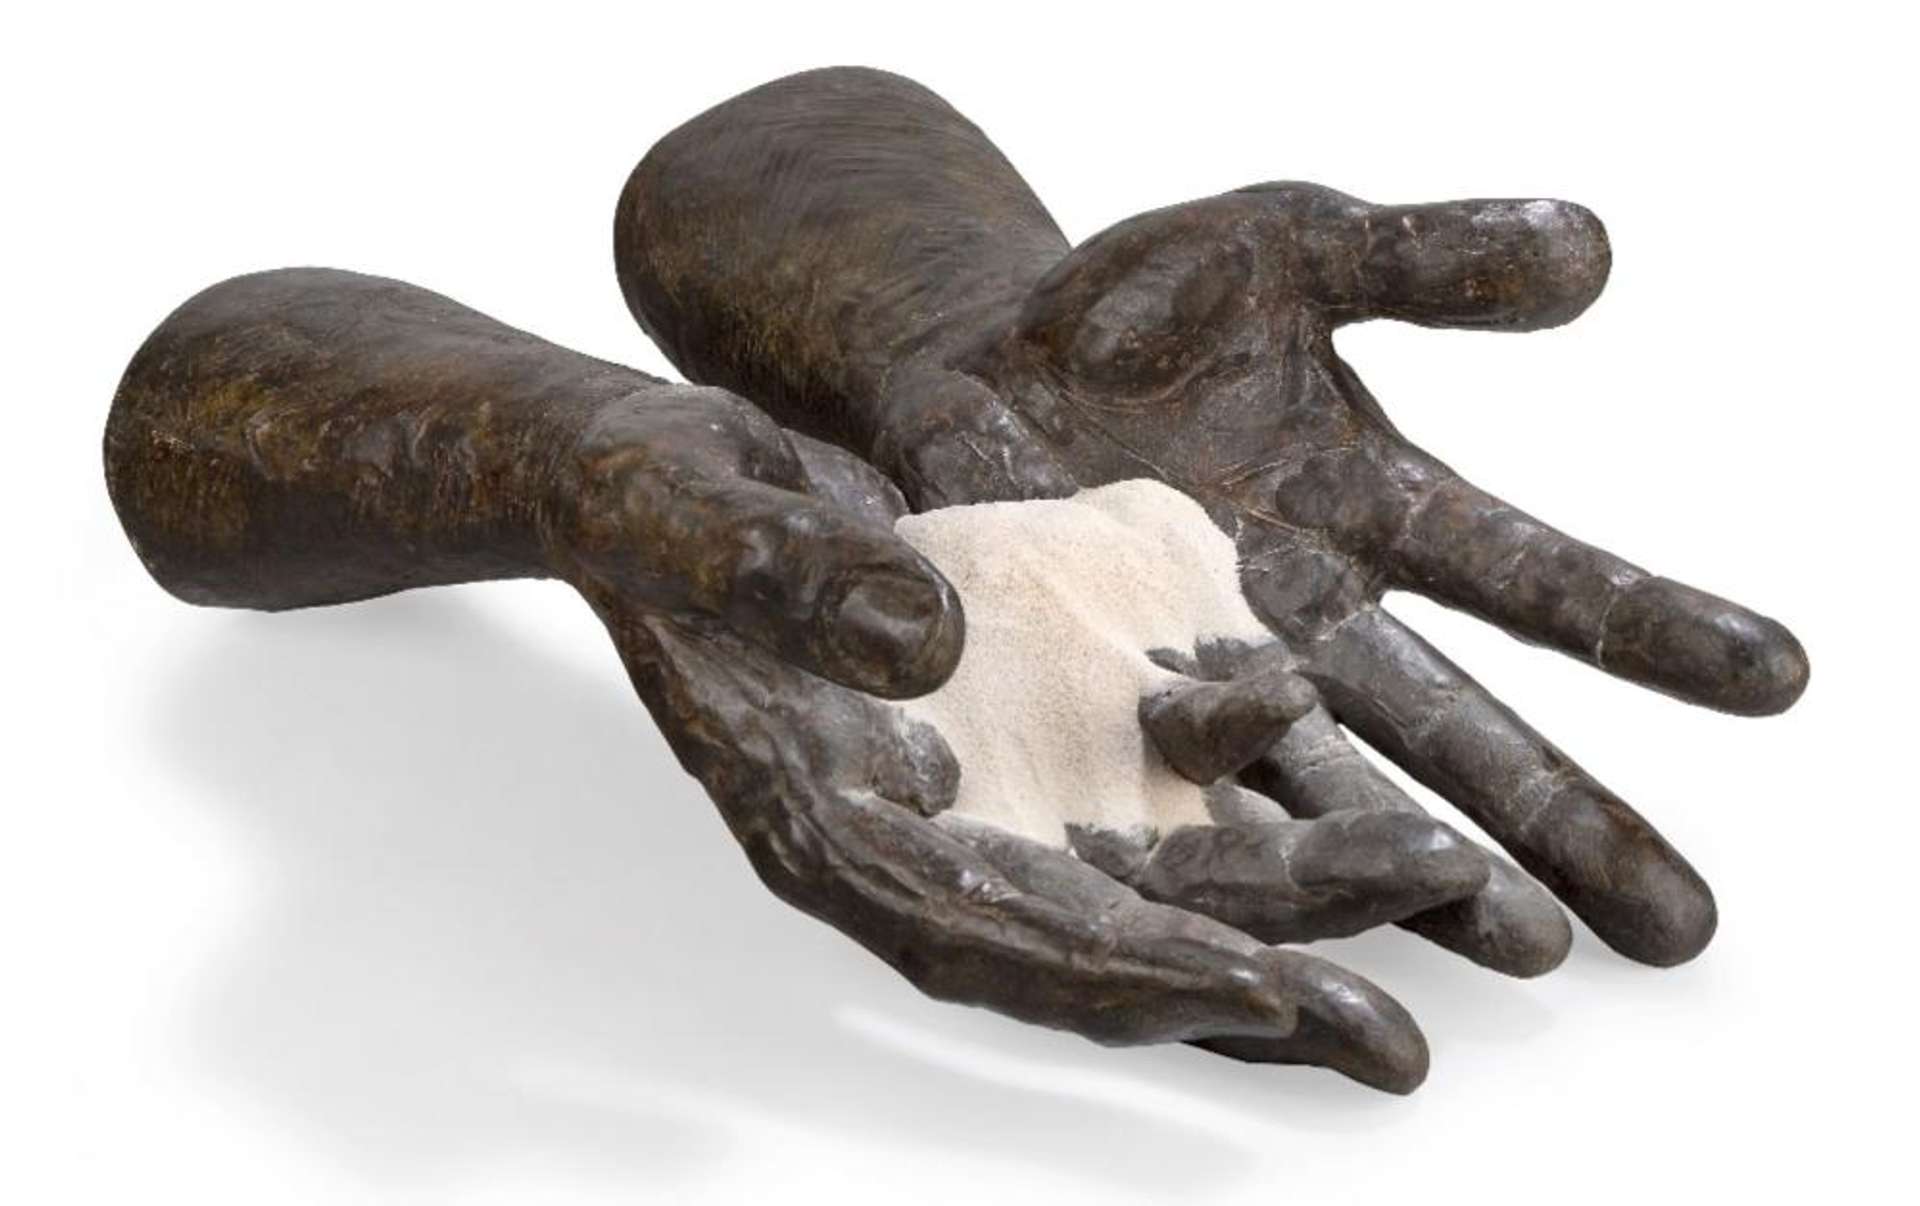 A bronze sculpture titled "You Cannot Stop Time" featuring a large hand holding a glass sphere, mounted on a rectangular base.